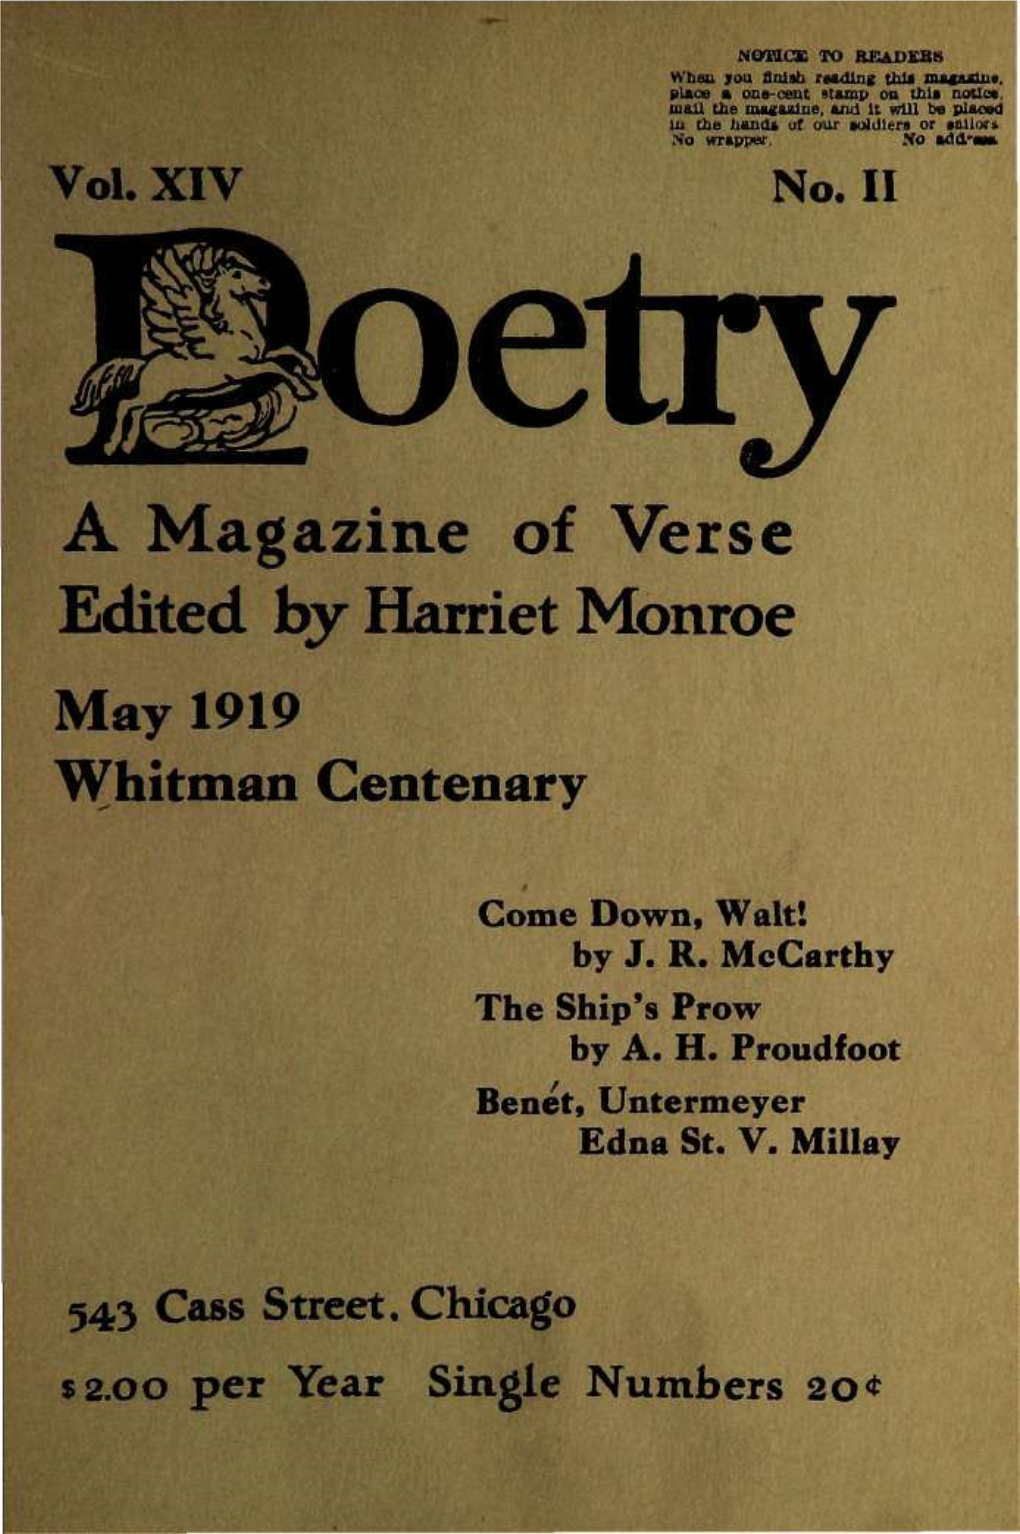 Vol. XIV No. II a Magazine of Verse Edited by Harriet Monroe May 1919